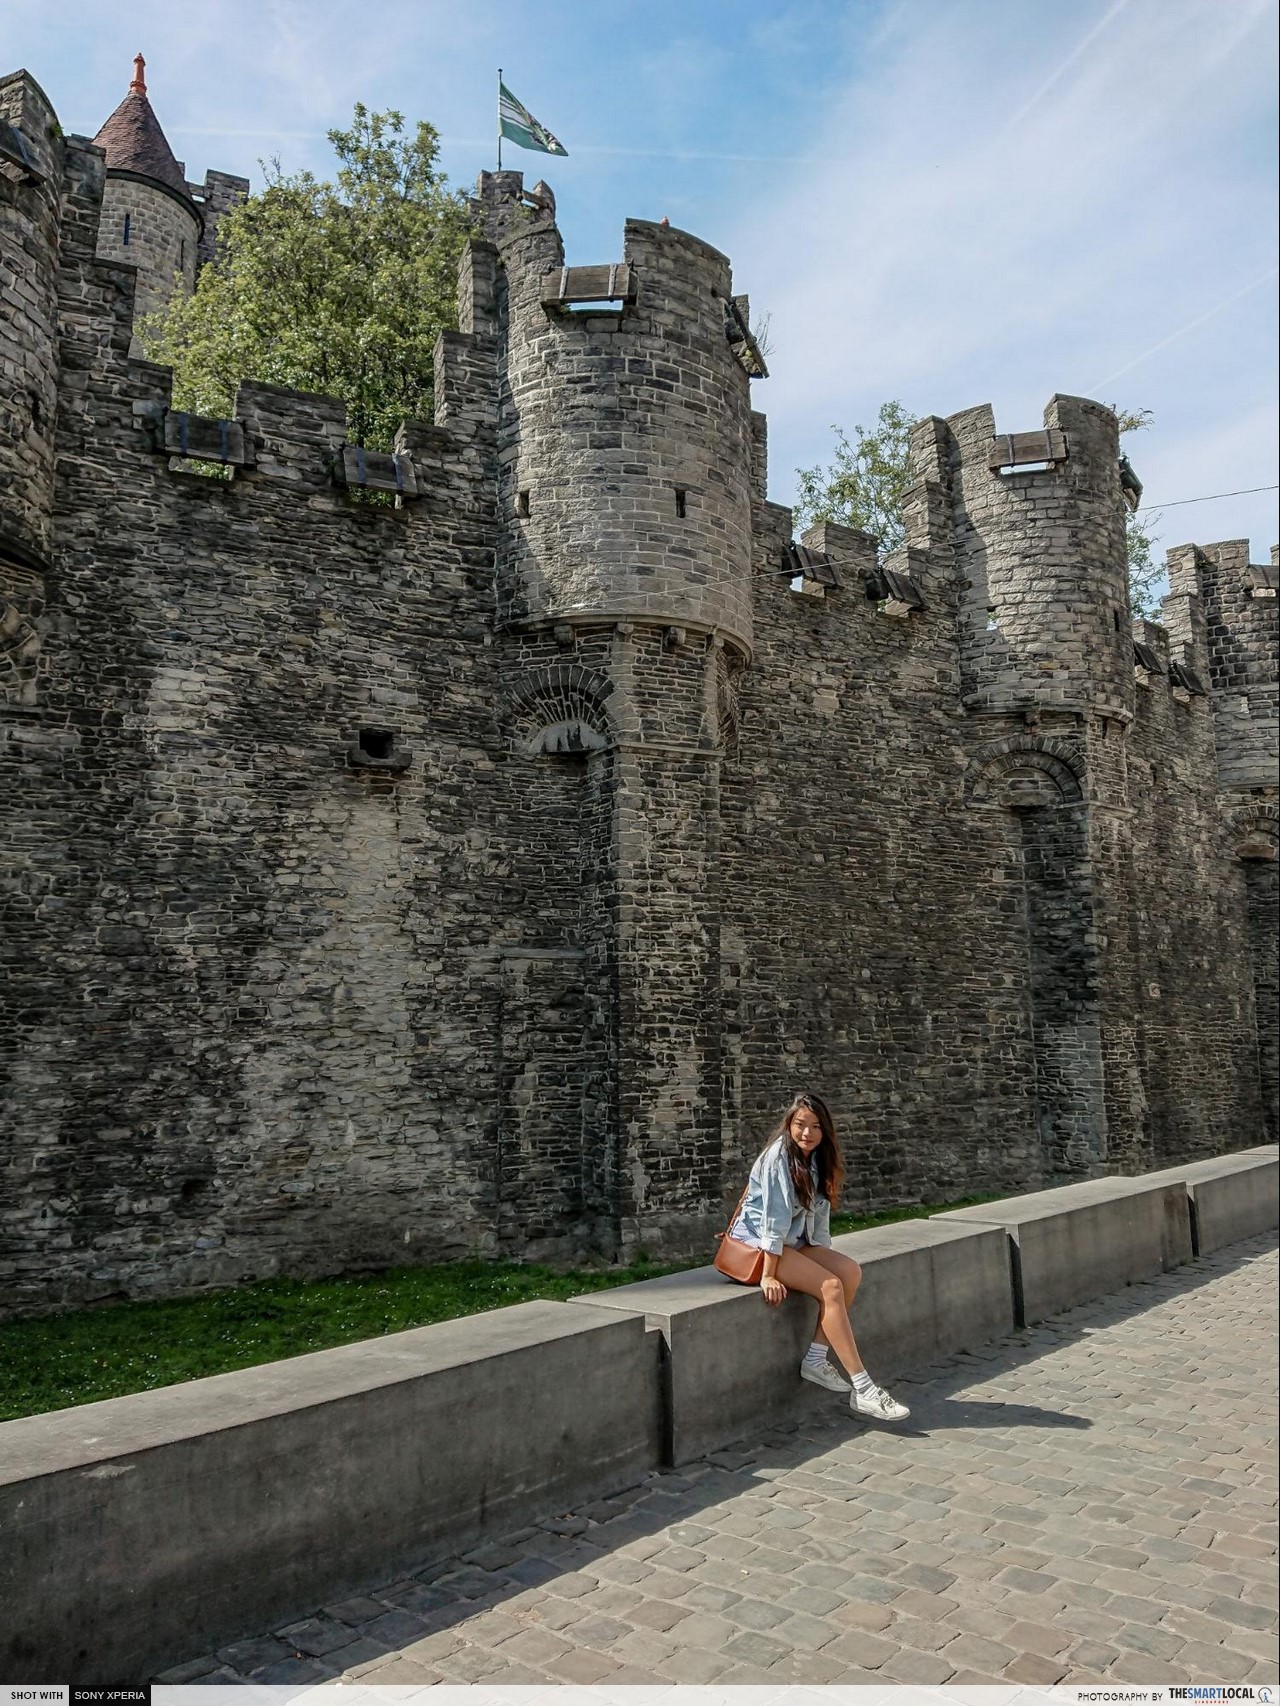 Brussels 7 things (12) - Gravensteen Castle with Xenia